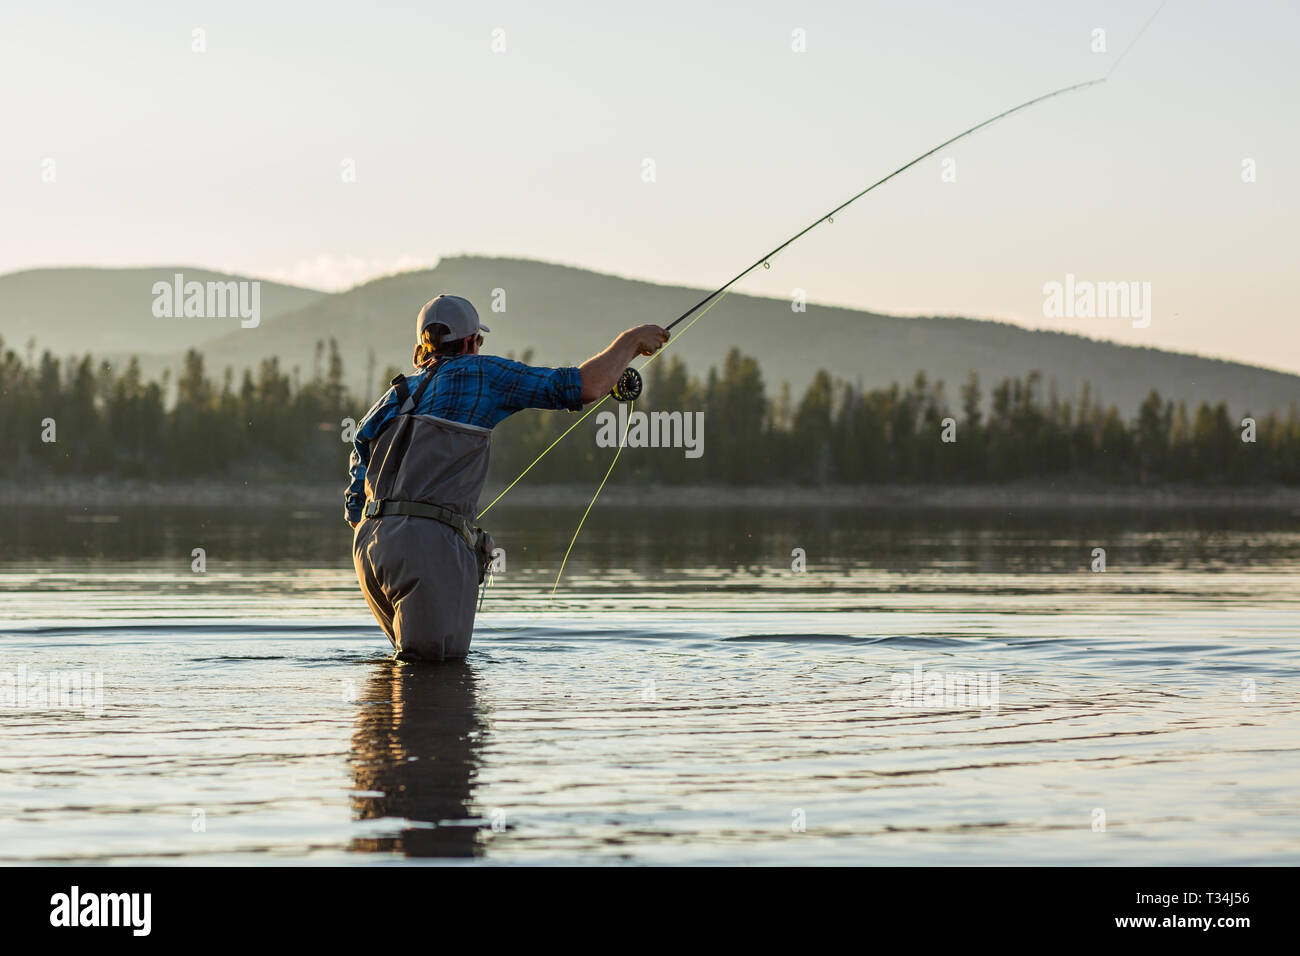 Man standing in river fly fishing, United States Stock Photo